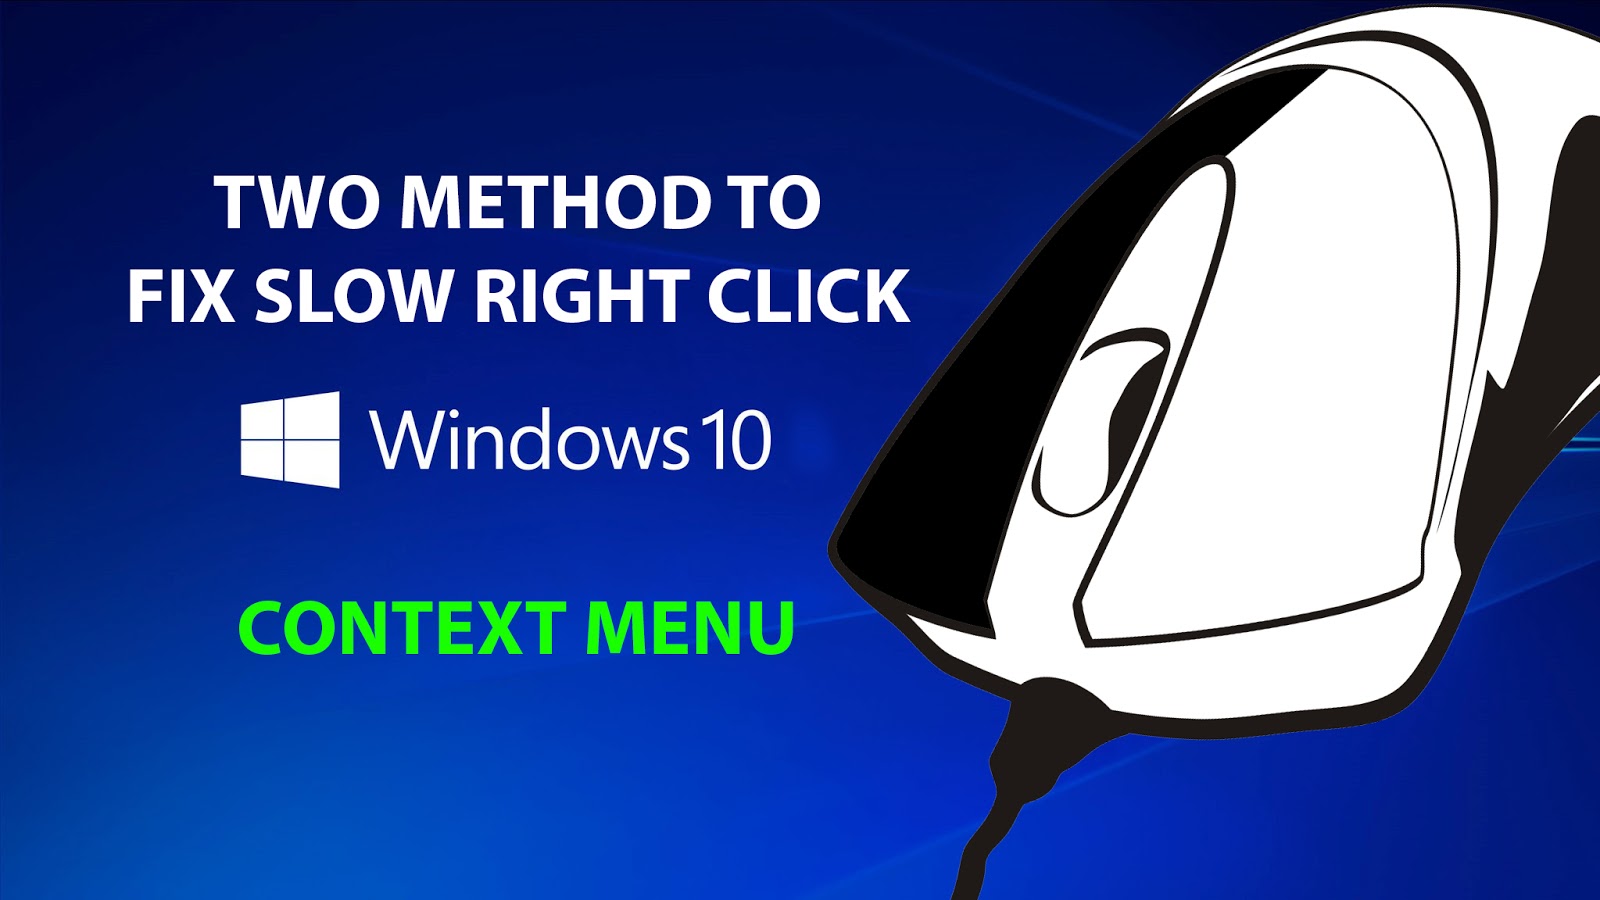 Right fix. Right Mouse кнопка. Context button. The Slow Fix.